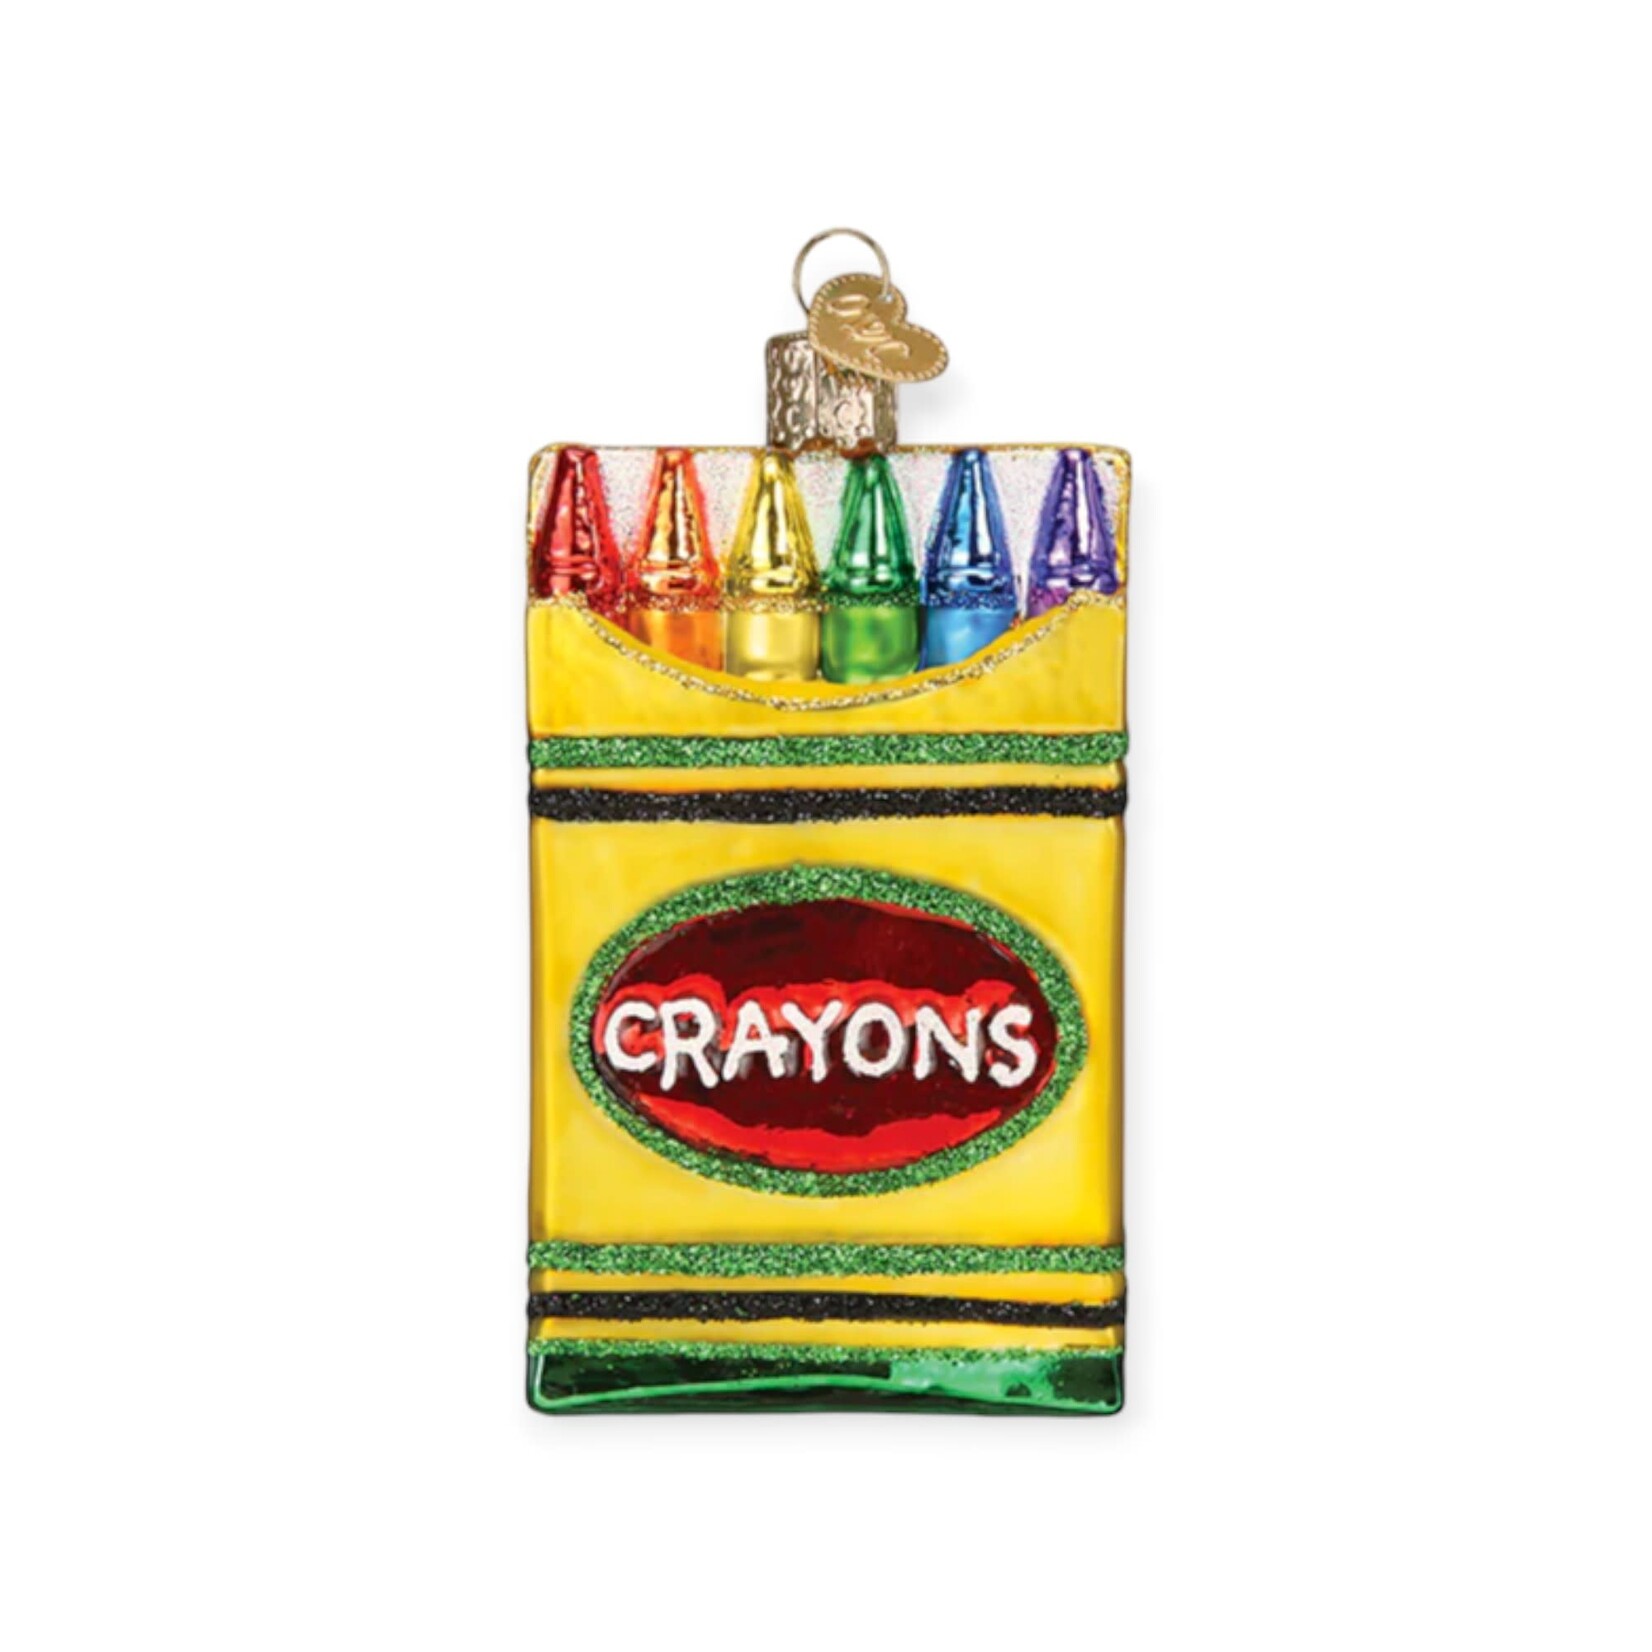 Old World Christmas Box of Crayons Glass Ornament